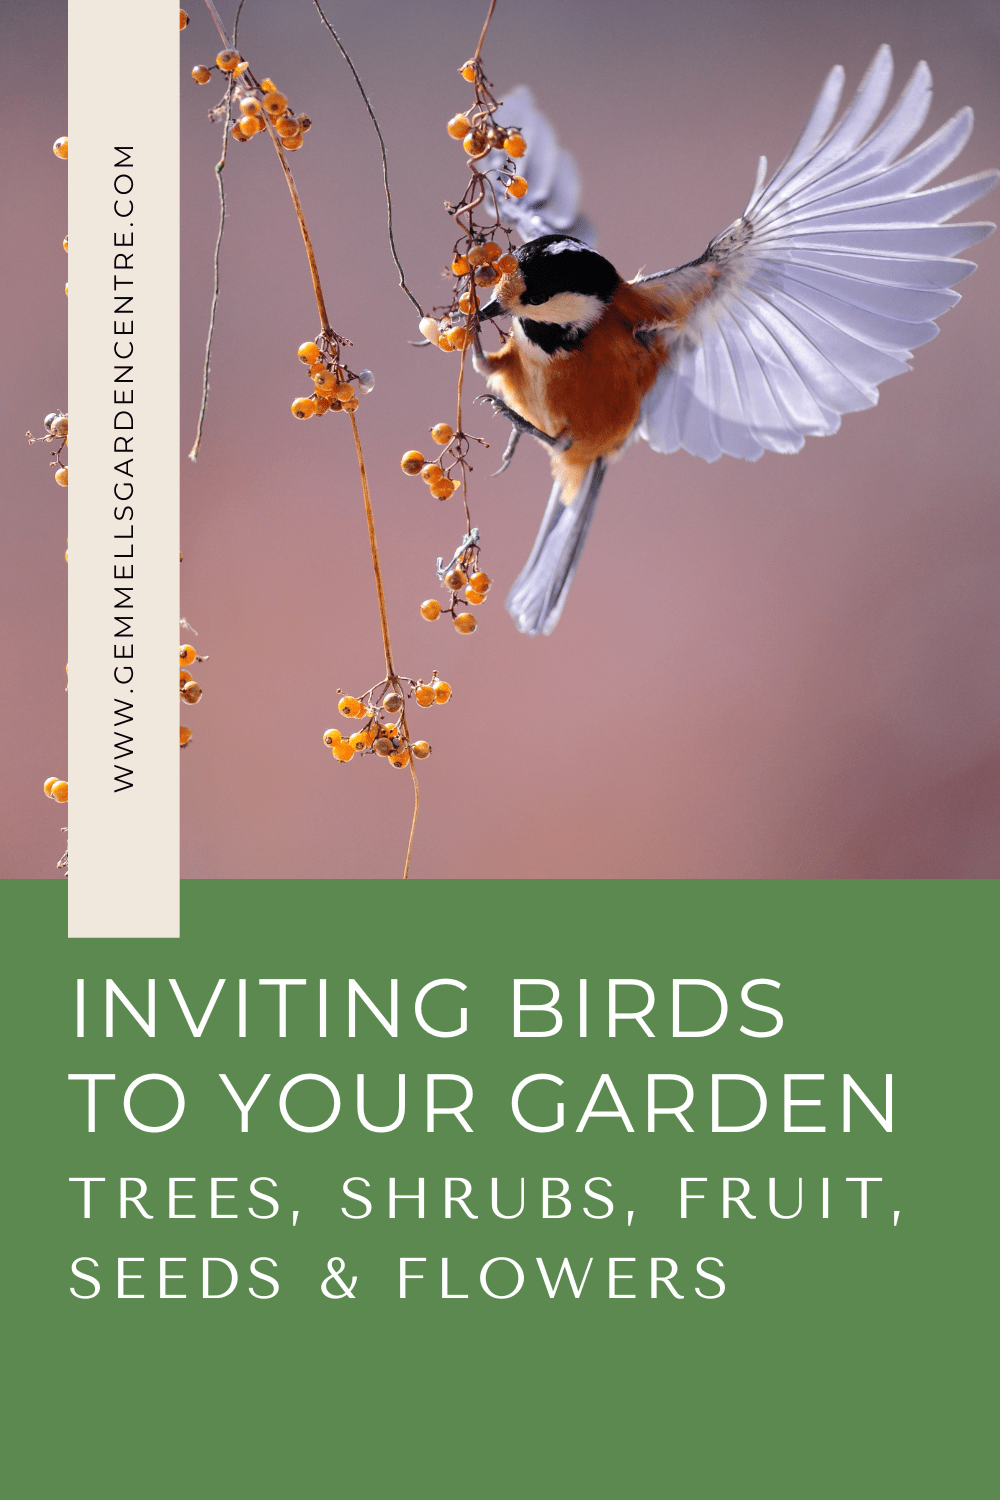 Inviting Birds to your Garden | Trees, Shrubs, Fruit, Seeds & Flowers